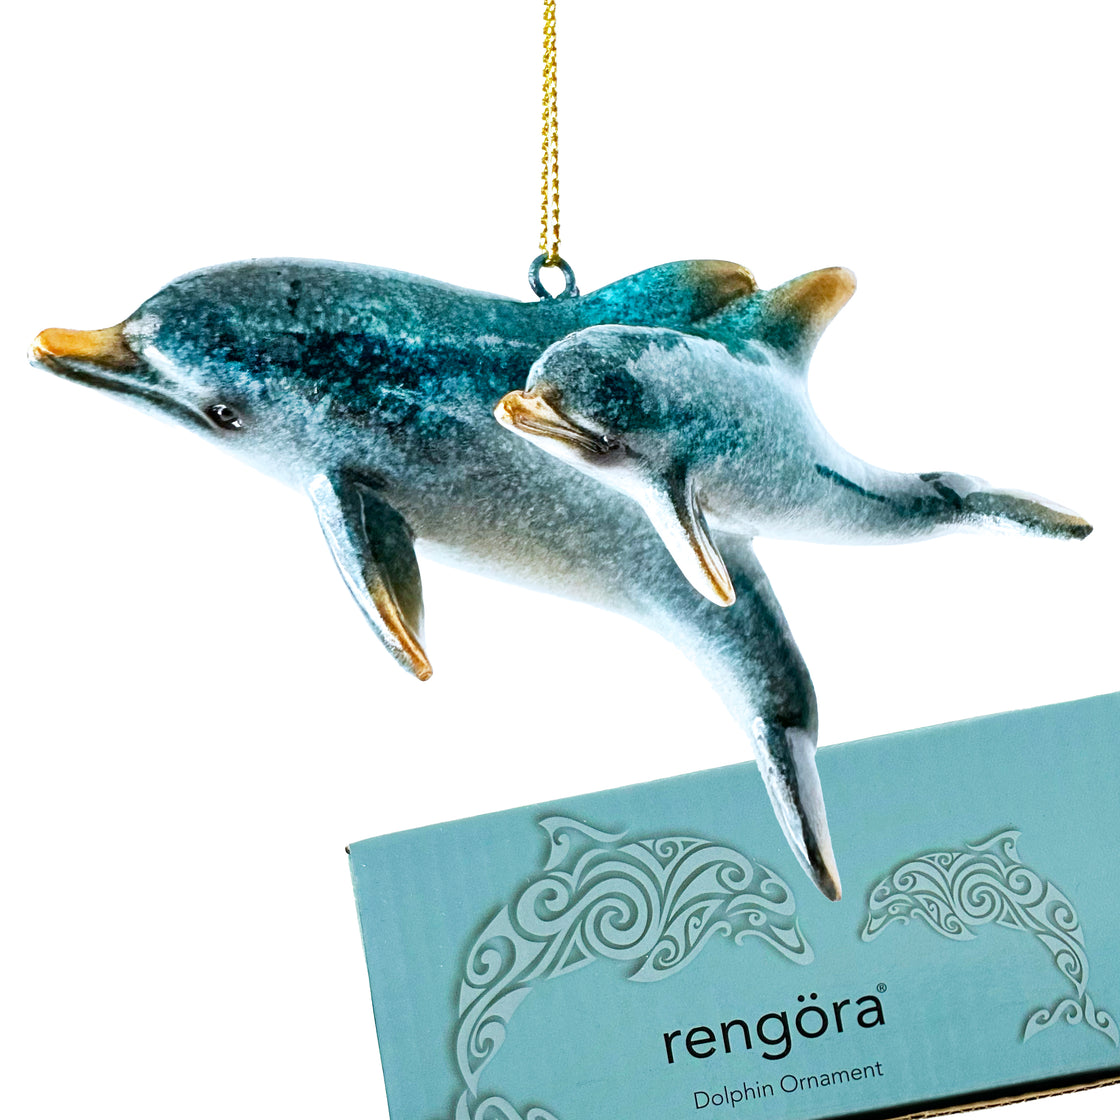 rengöra  dolphins mother with baby pictured with customized blue packaging box it comes in